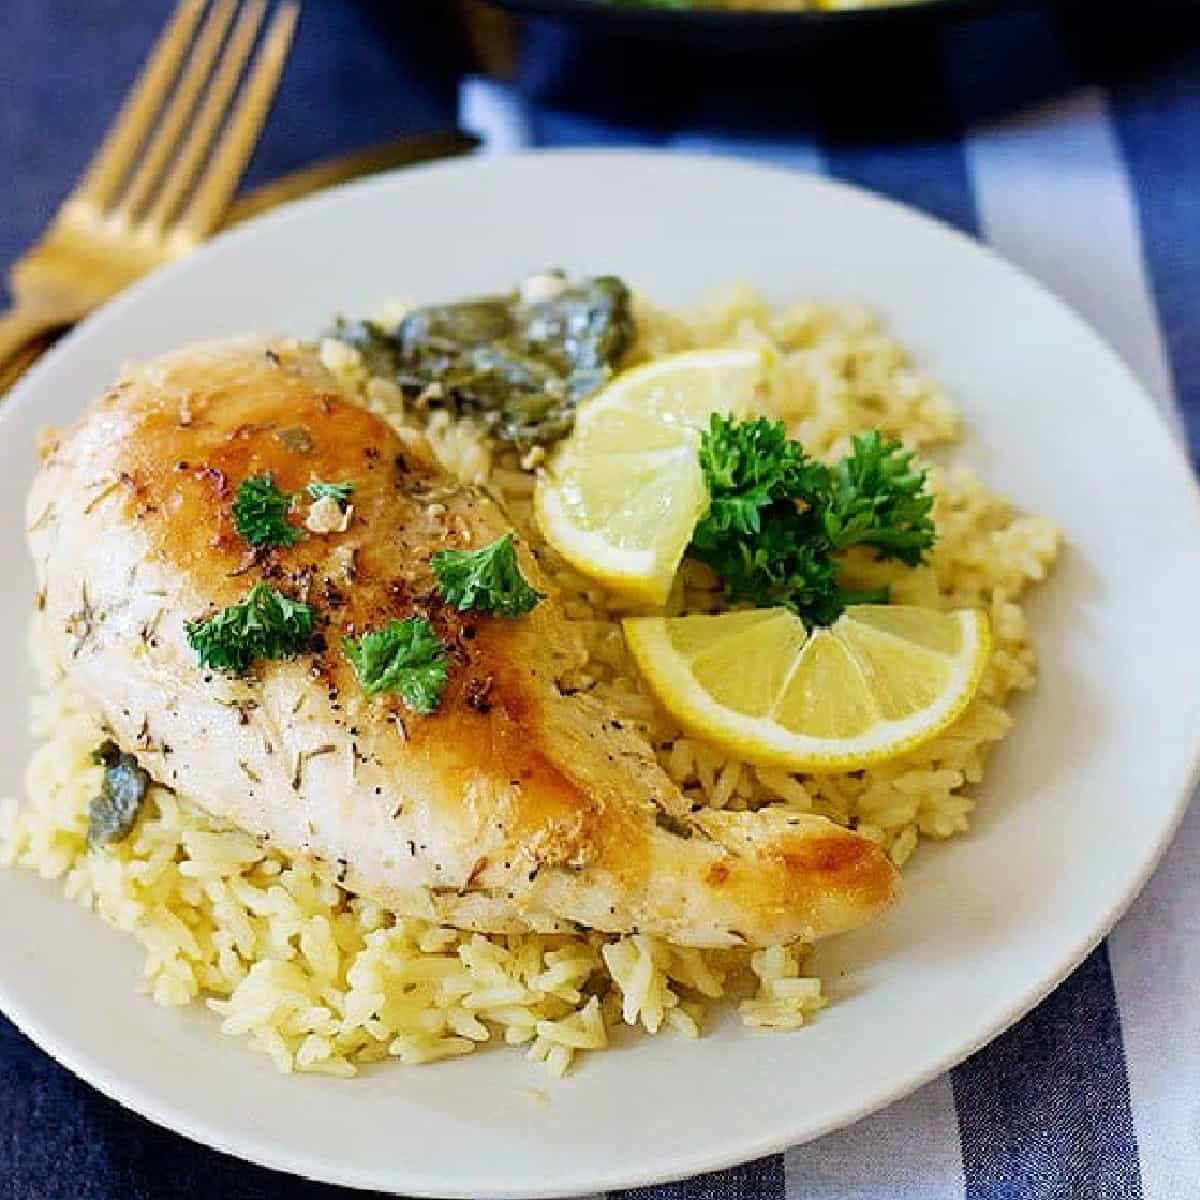 Easy Lemon Butter Chicken is a fantastic family dinner option. Juicy chicken bursting with amazing flavors takes your usual dinner to a whole new level!
